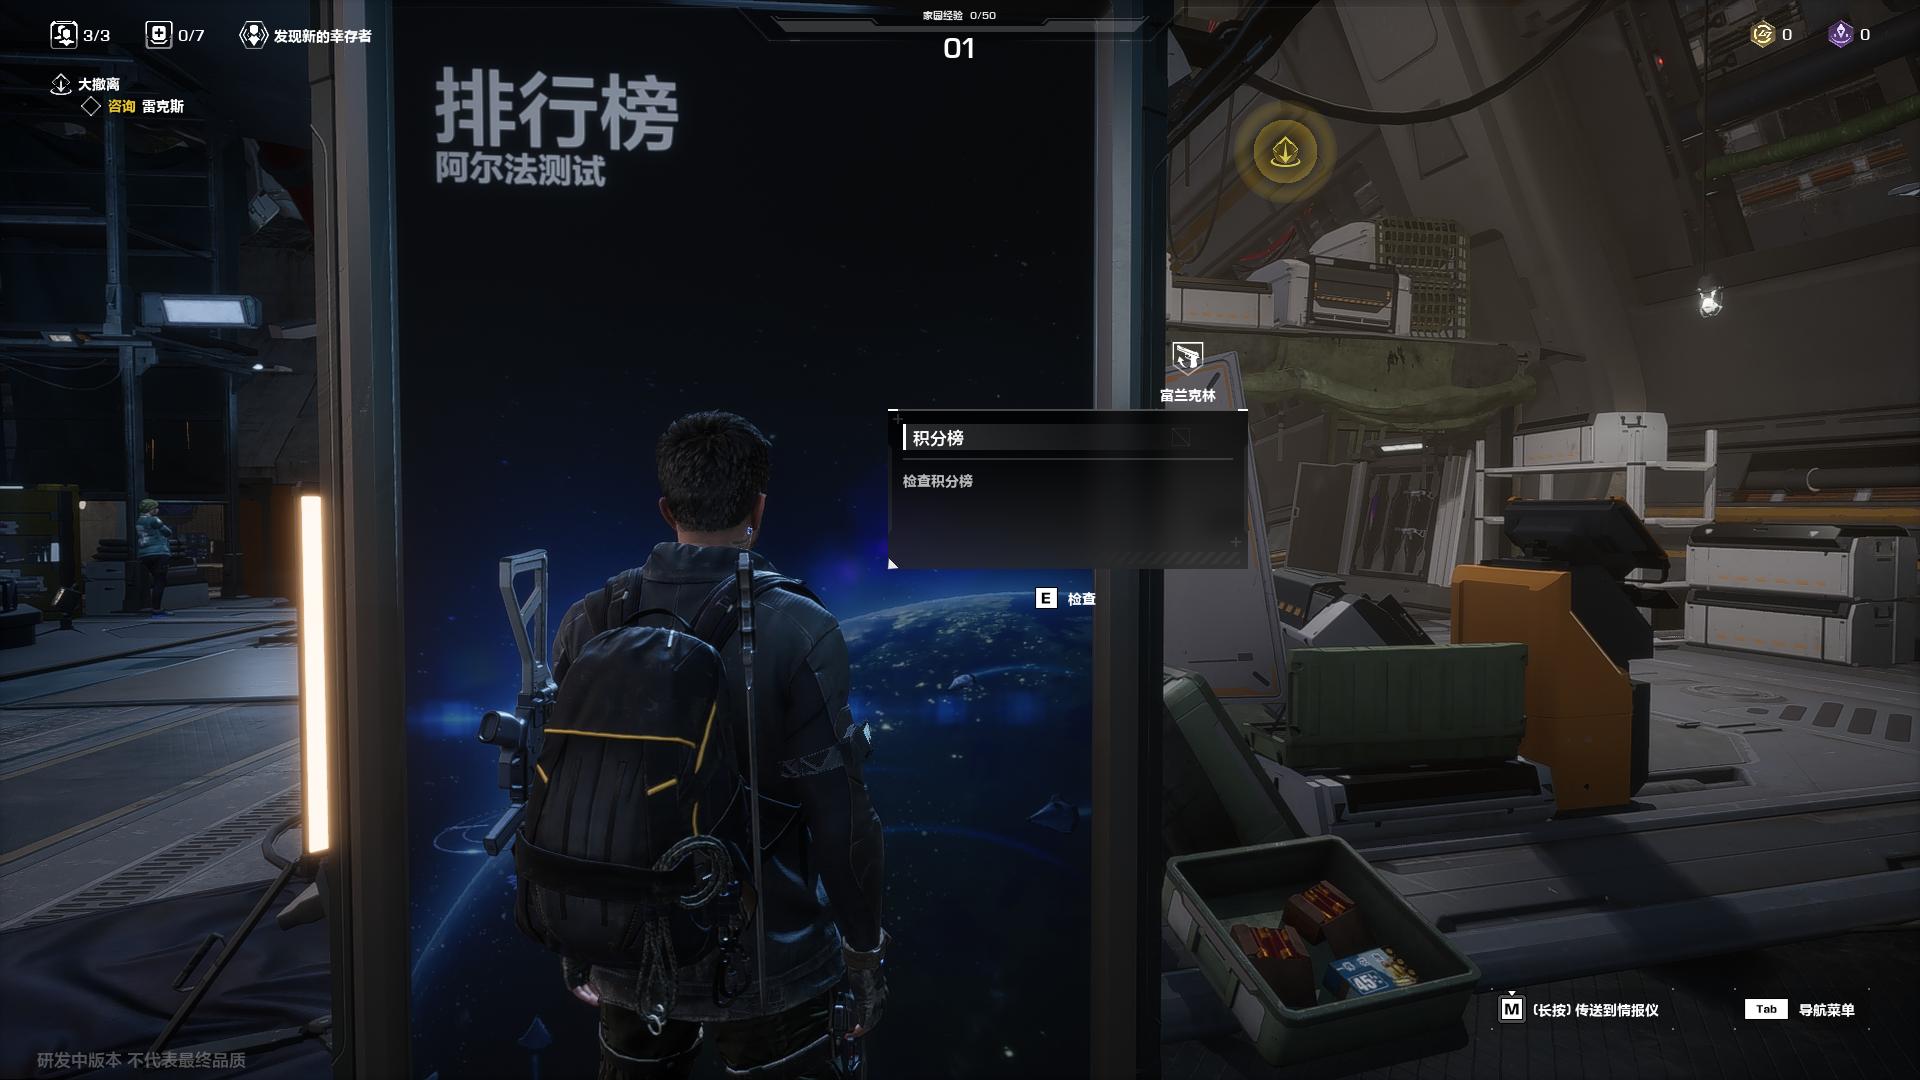 Tencent S Edge Of Rebirth Demo Report Production Of The Game Works Of China Digital Astronaut Studio Inews